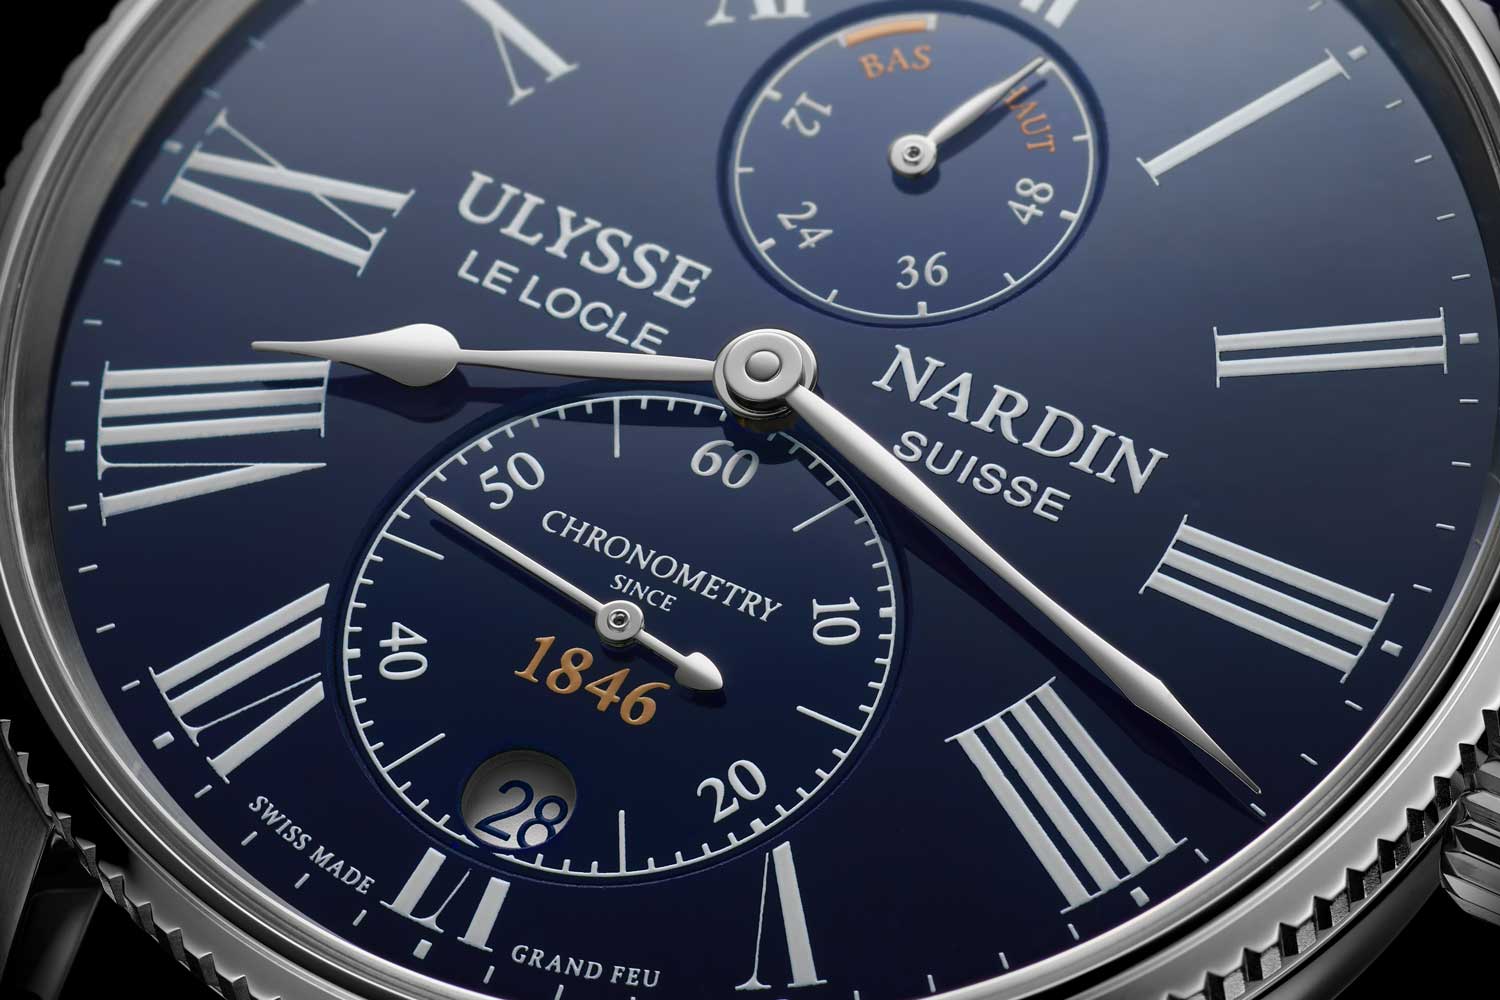 The watch’s cathedral hands, Roman numerals and sub-dials in a vertical arrangement are features that were originally seen in the UN chronometers from the 19th century.